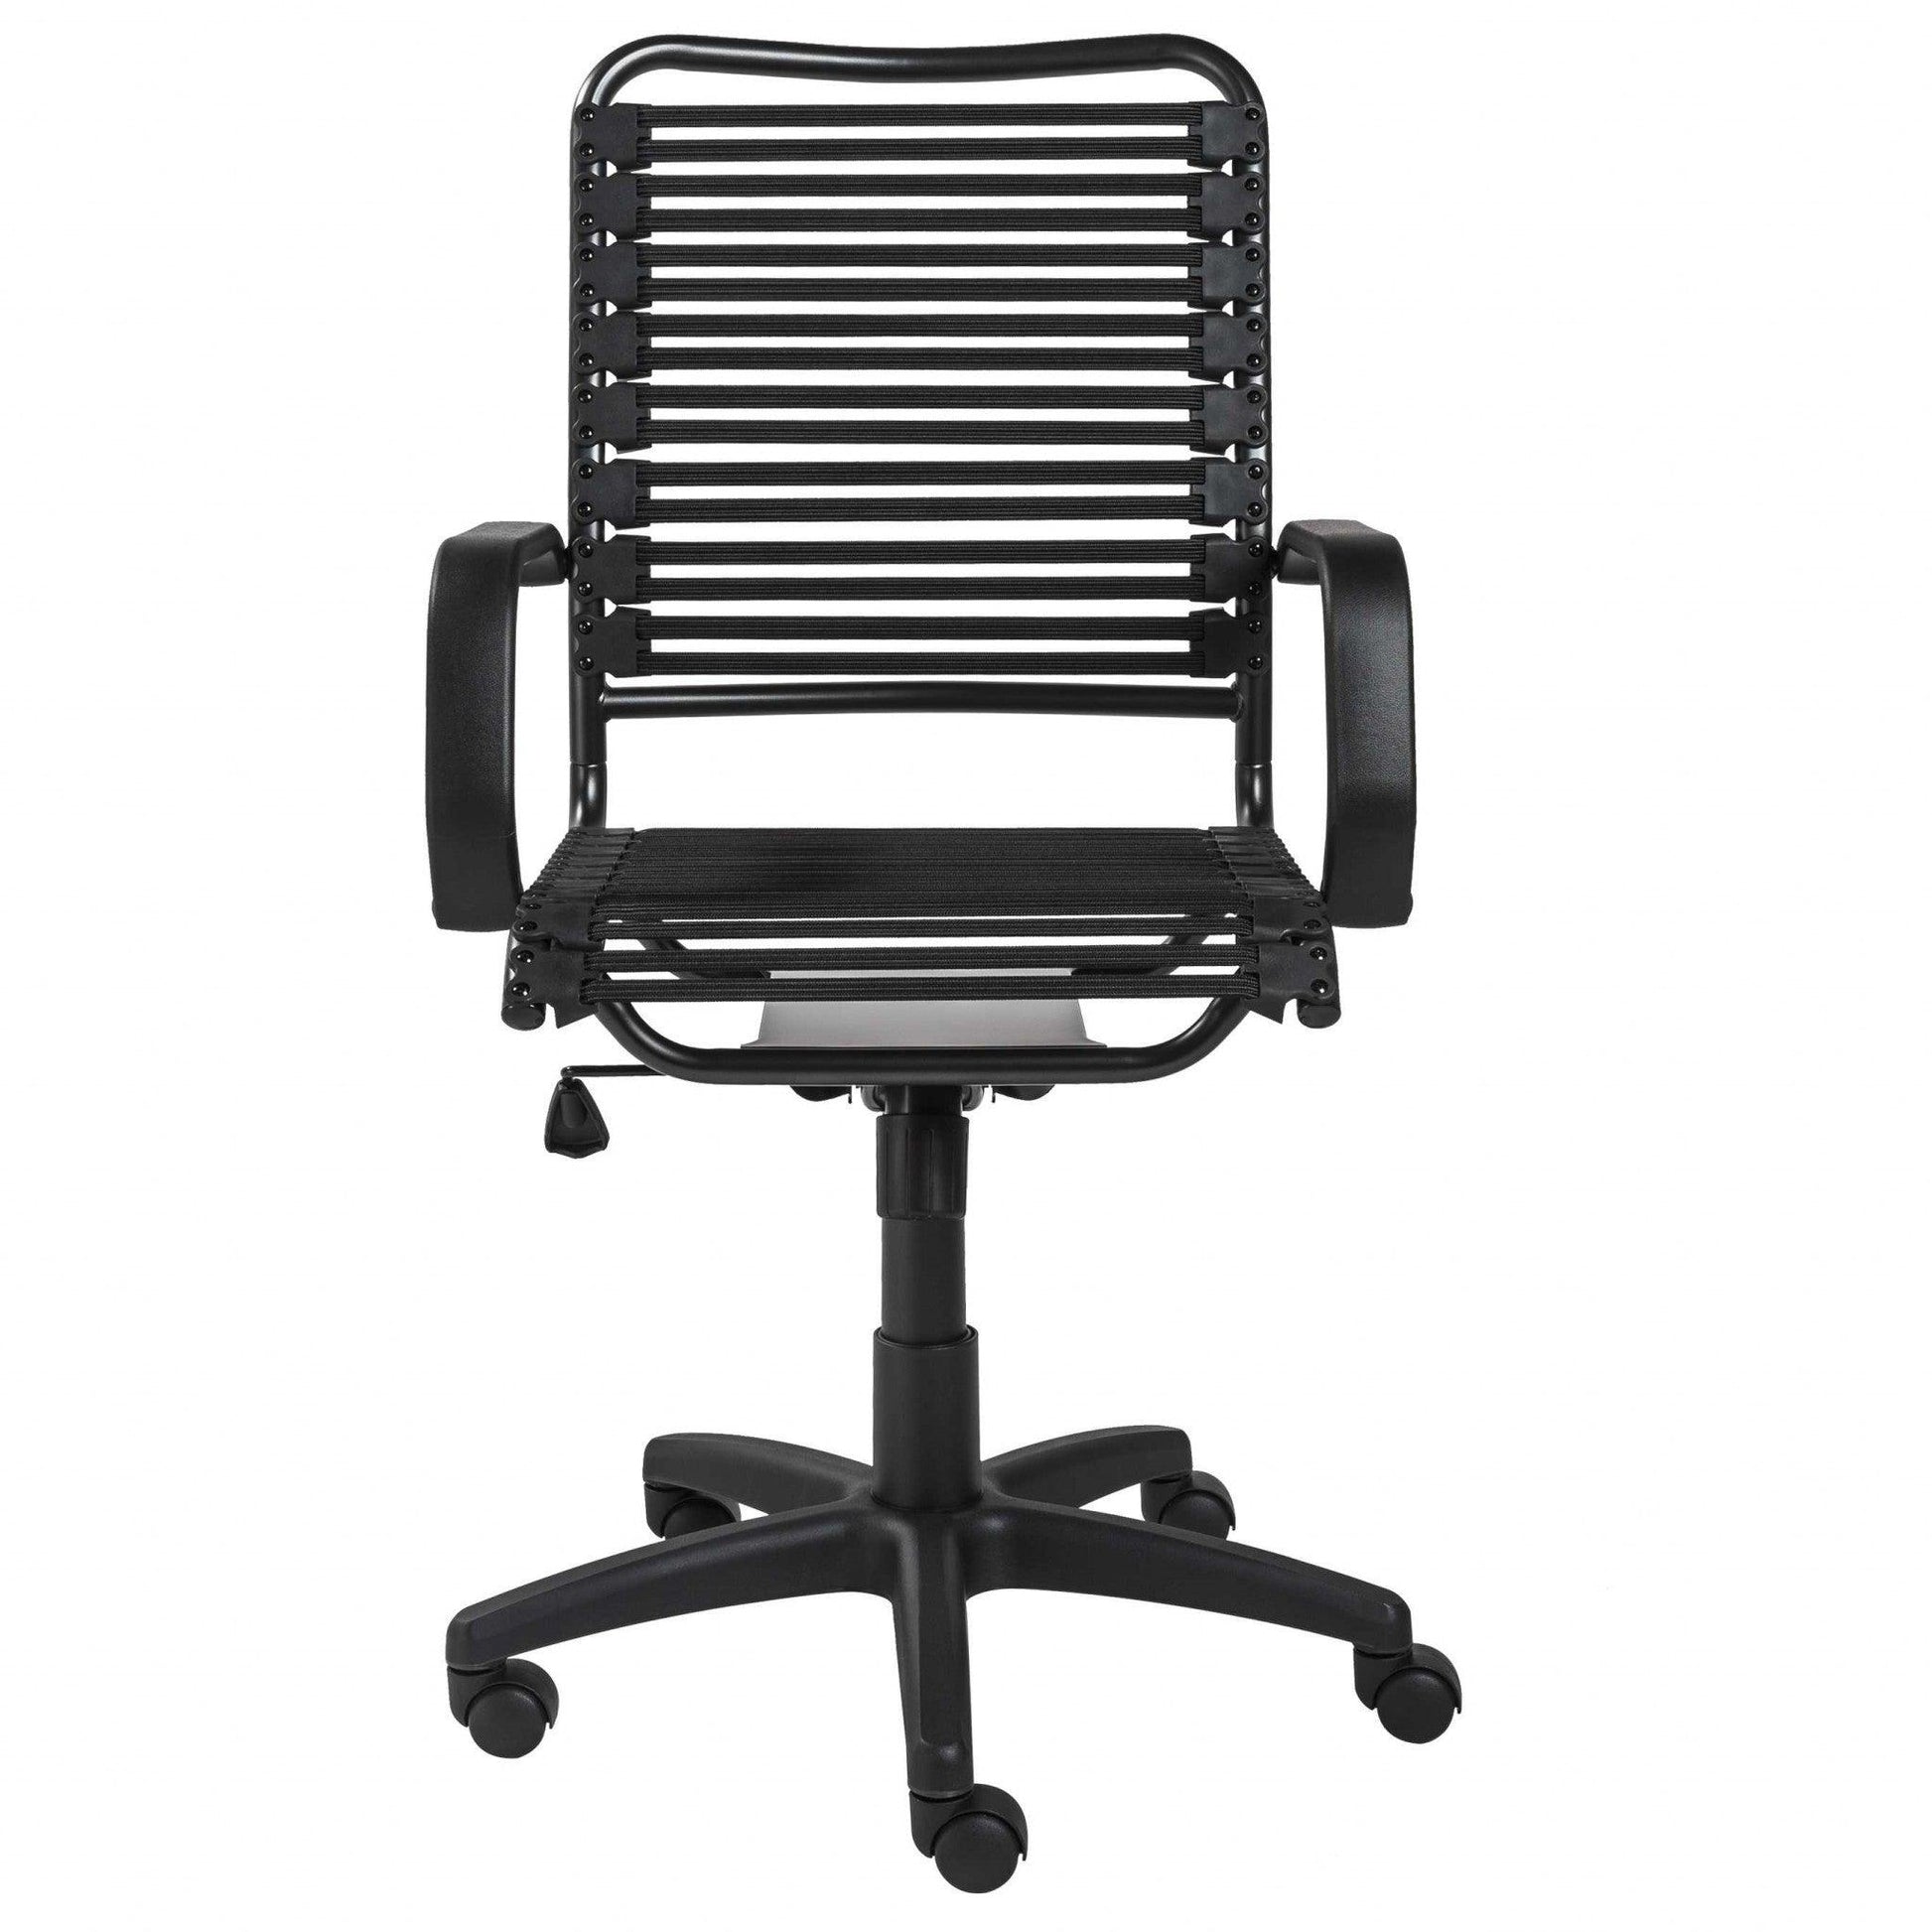 23.04" X 25.6" X 41.74" Black Flat Bungie Cords High Back Office Chair with Graphite Black Frame and Base - AFS